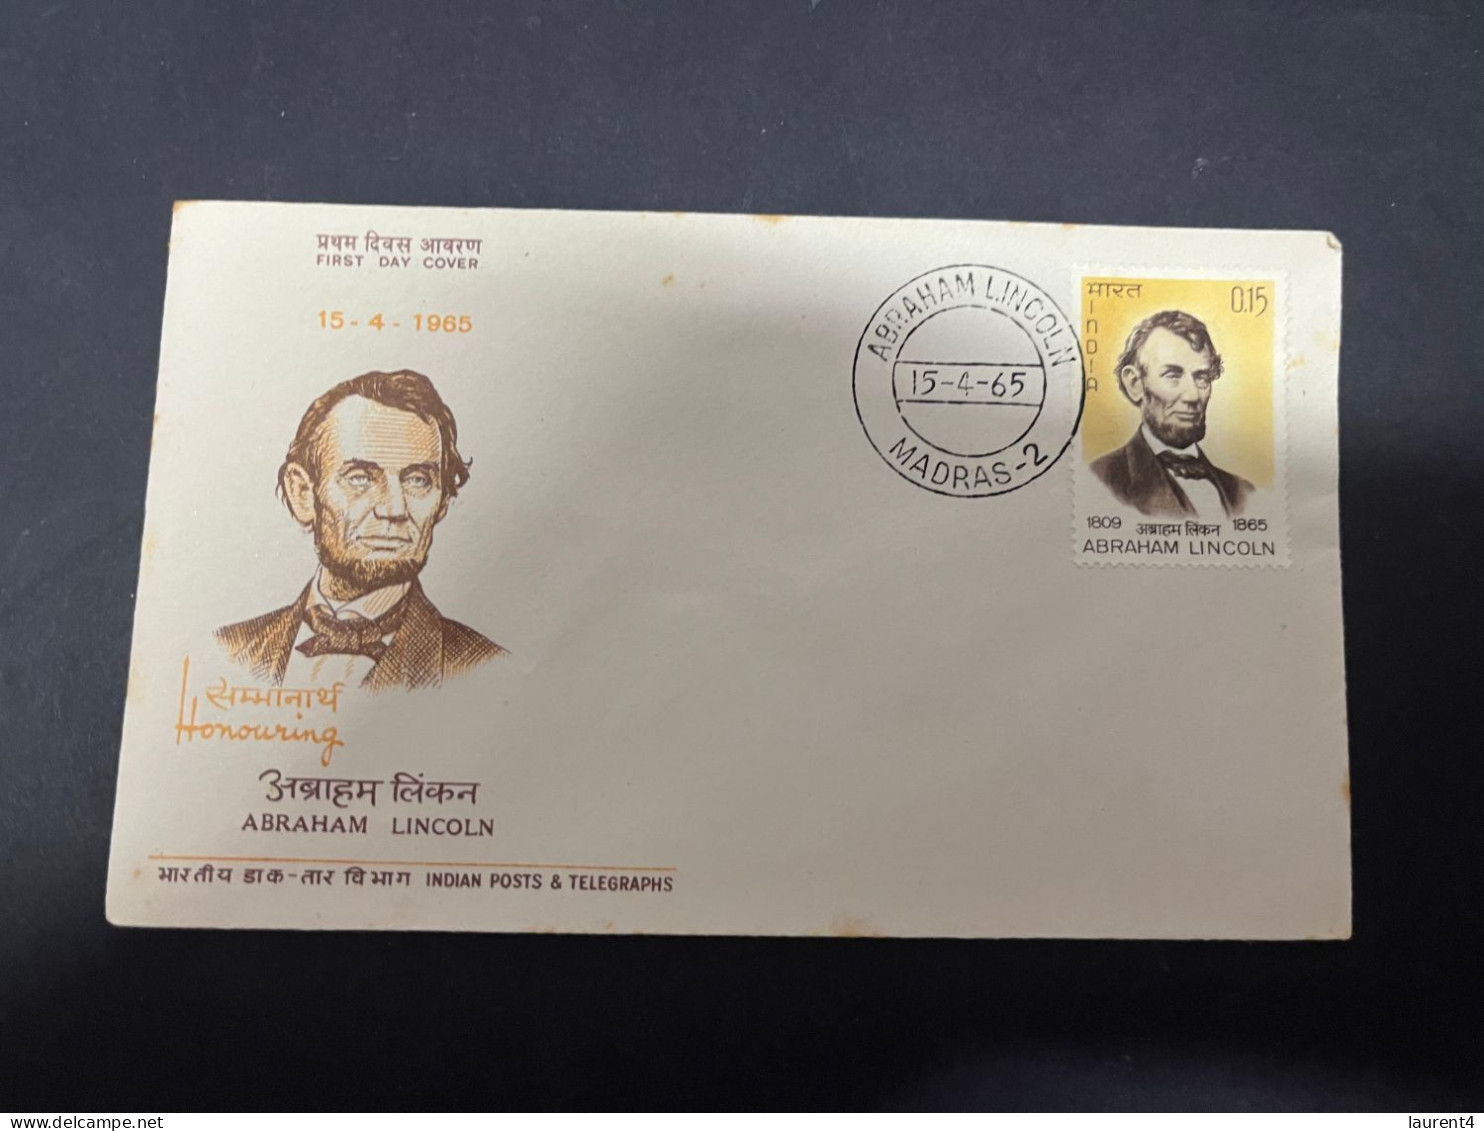 7-5-2024 (4 Z 24) INDIA FDC Cover - 1965 - Abraham Lincoln - FDC